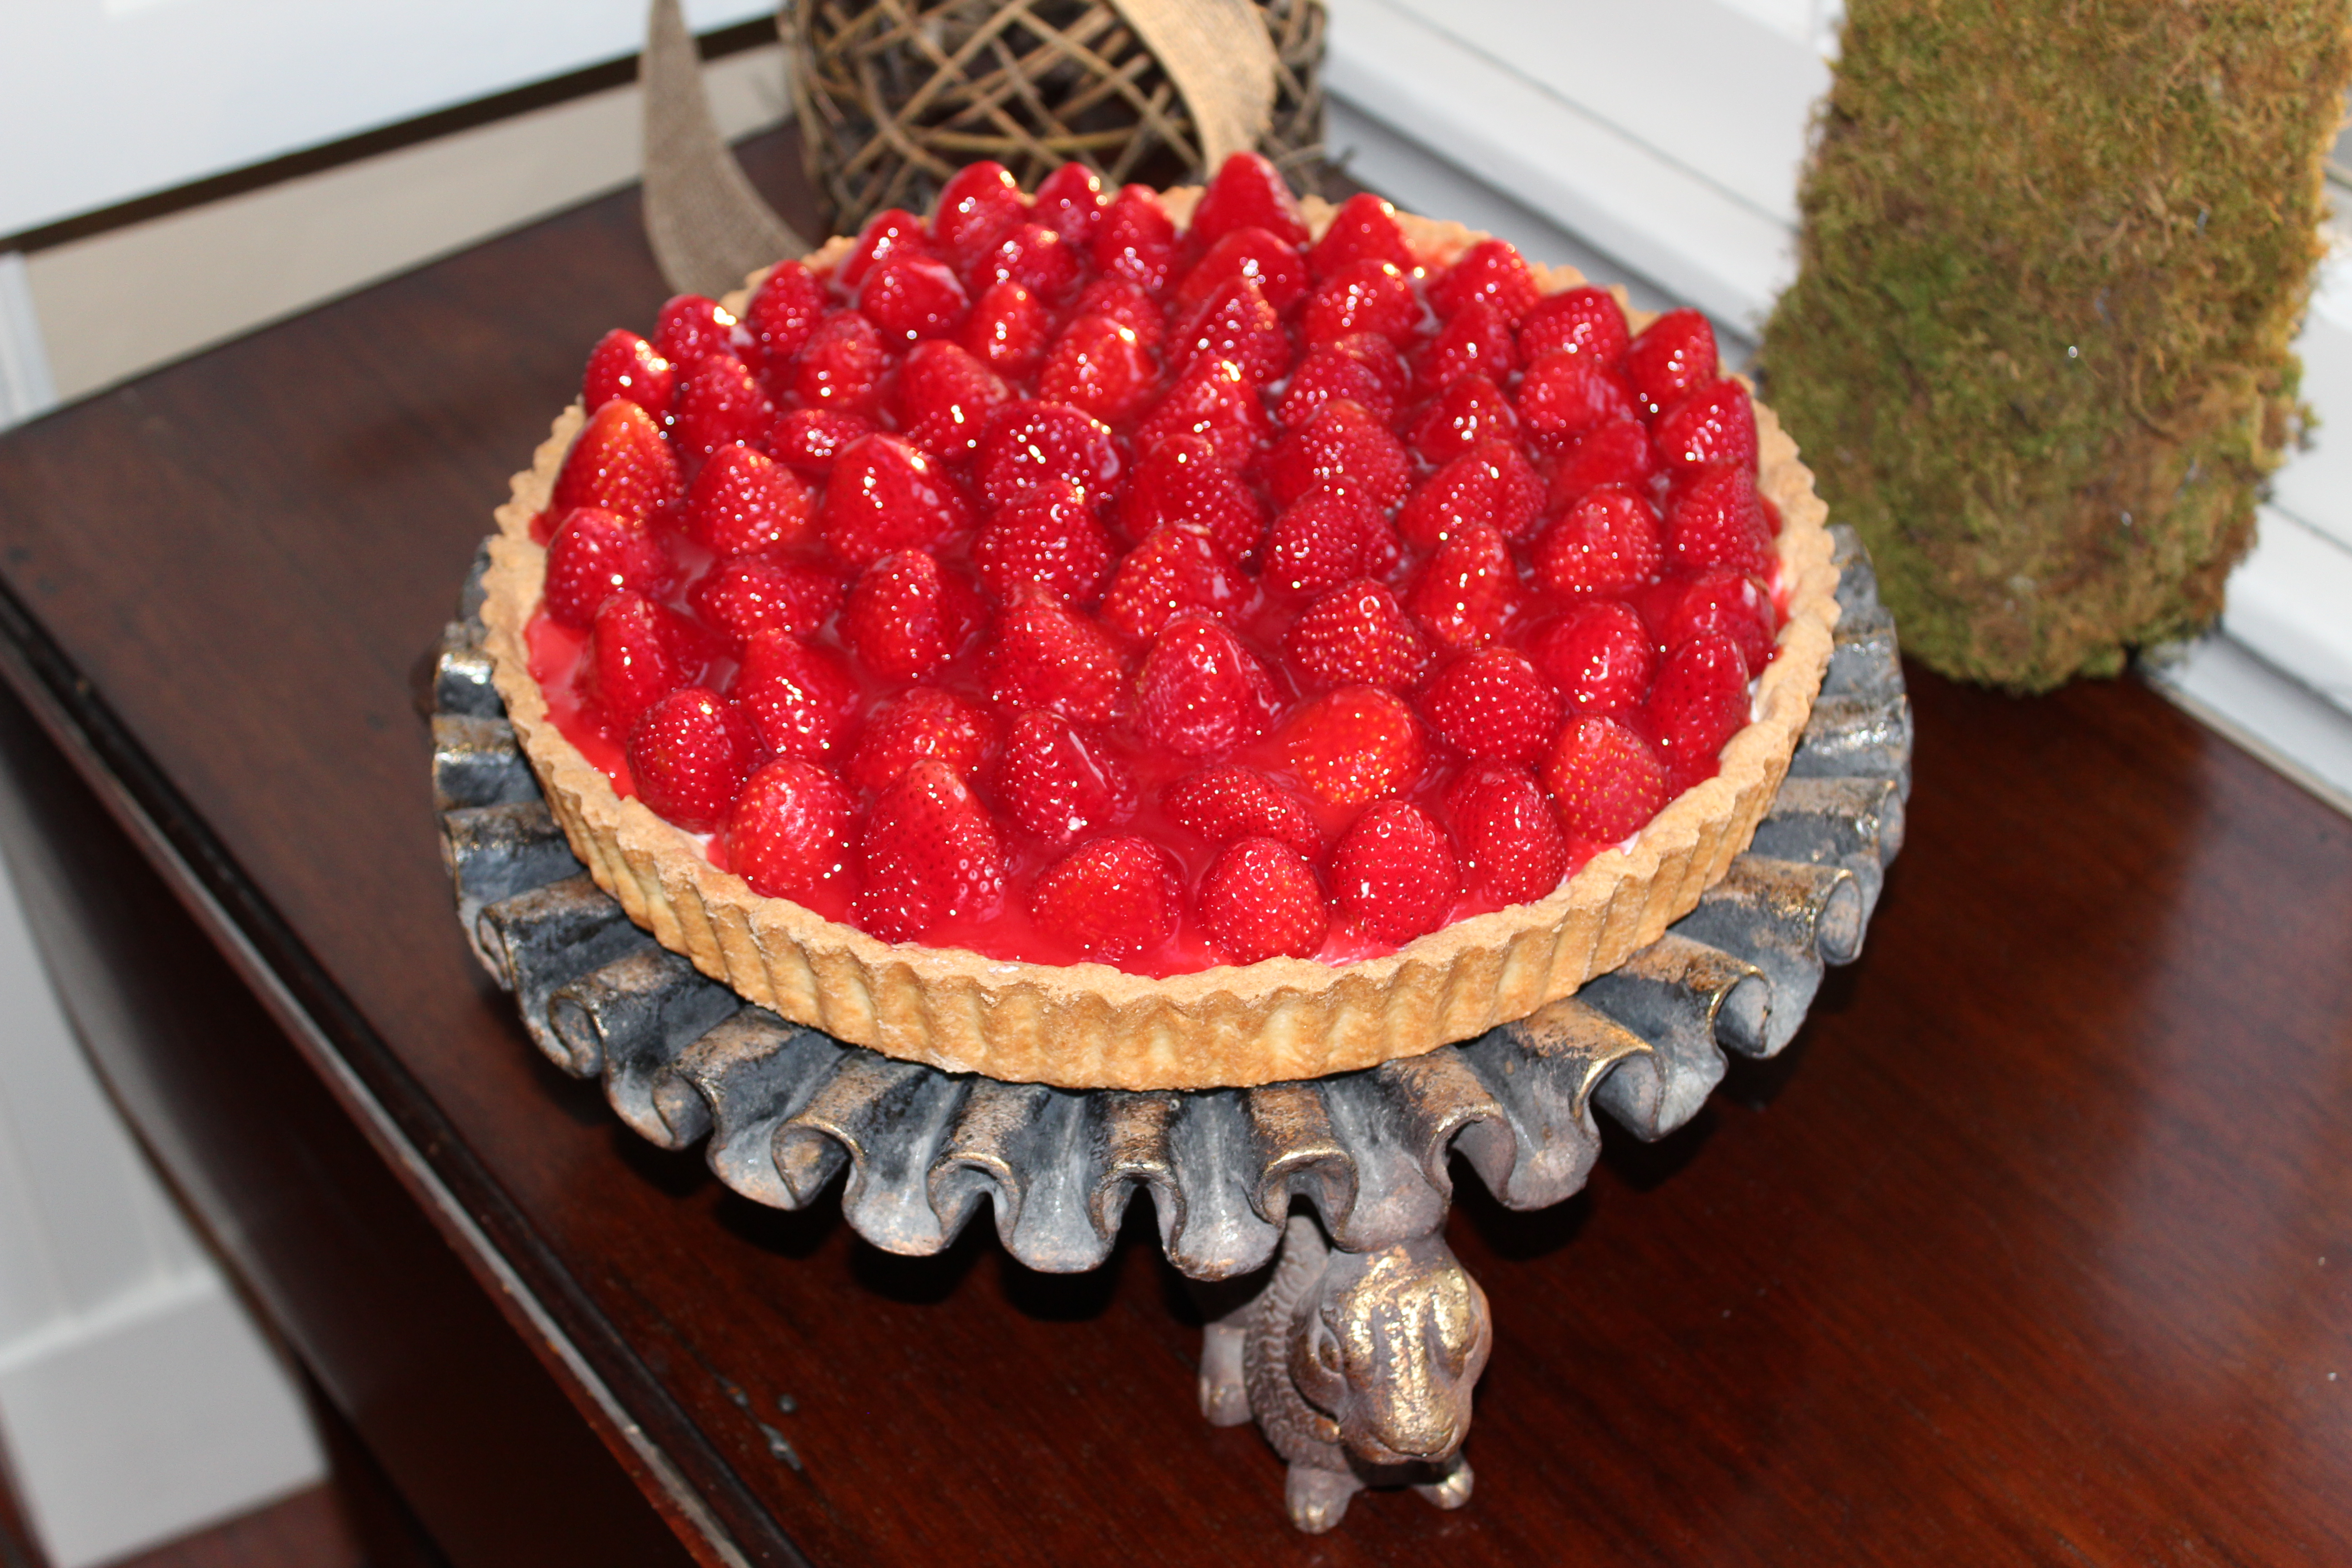 Serve a special strawberry dessert or salad at spring occasions